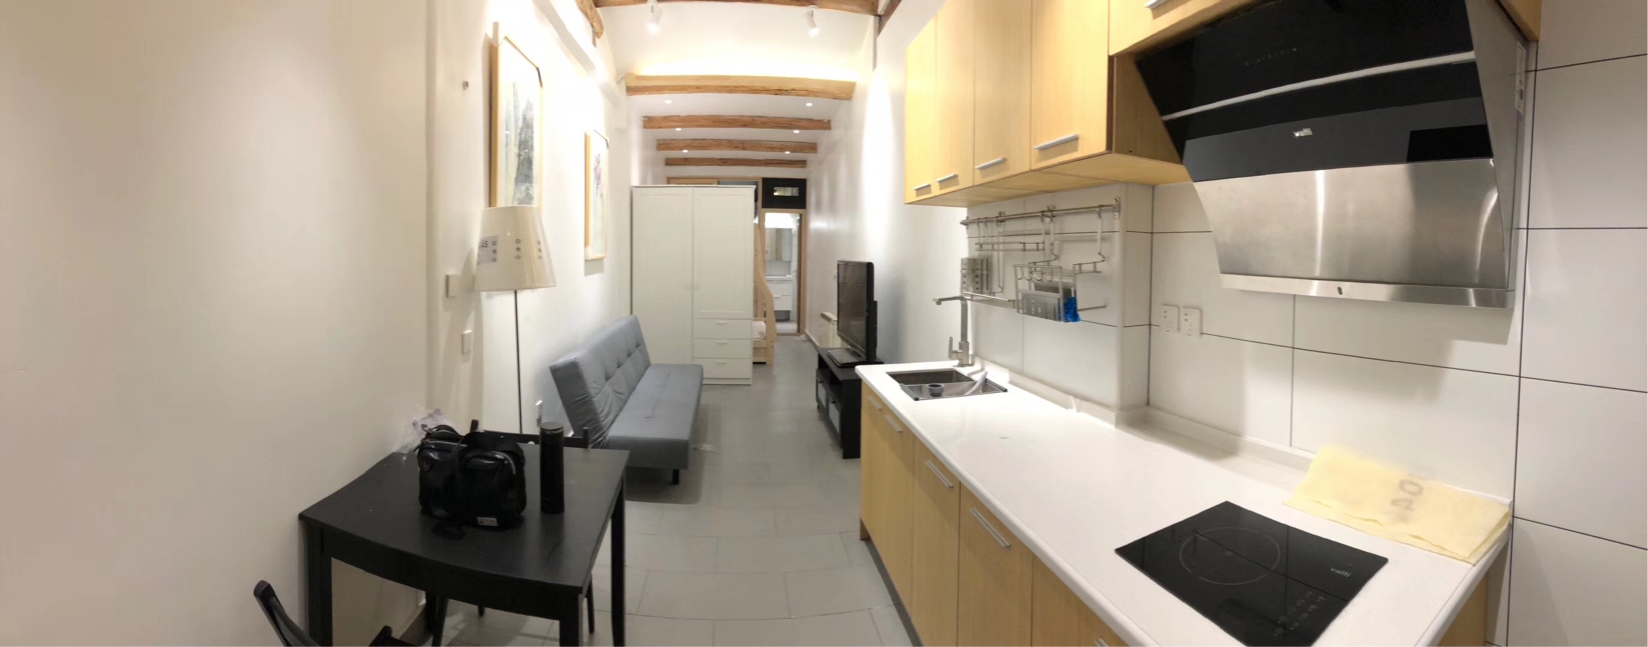 Beijing-Xicheng-350RMB/Night,Cozy Home,Clean&Comfy,Hustle & Bustle,“Friends”,Chilled,Pet Friendly